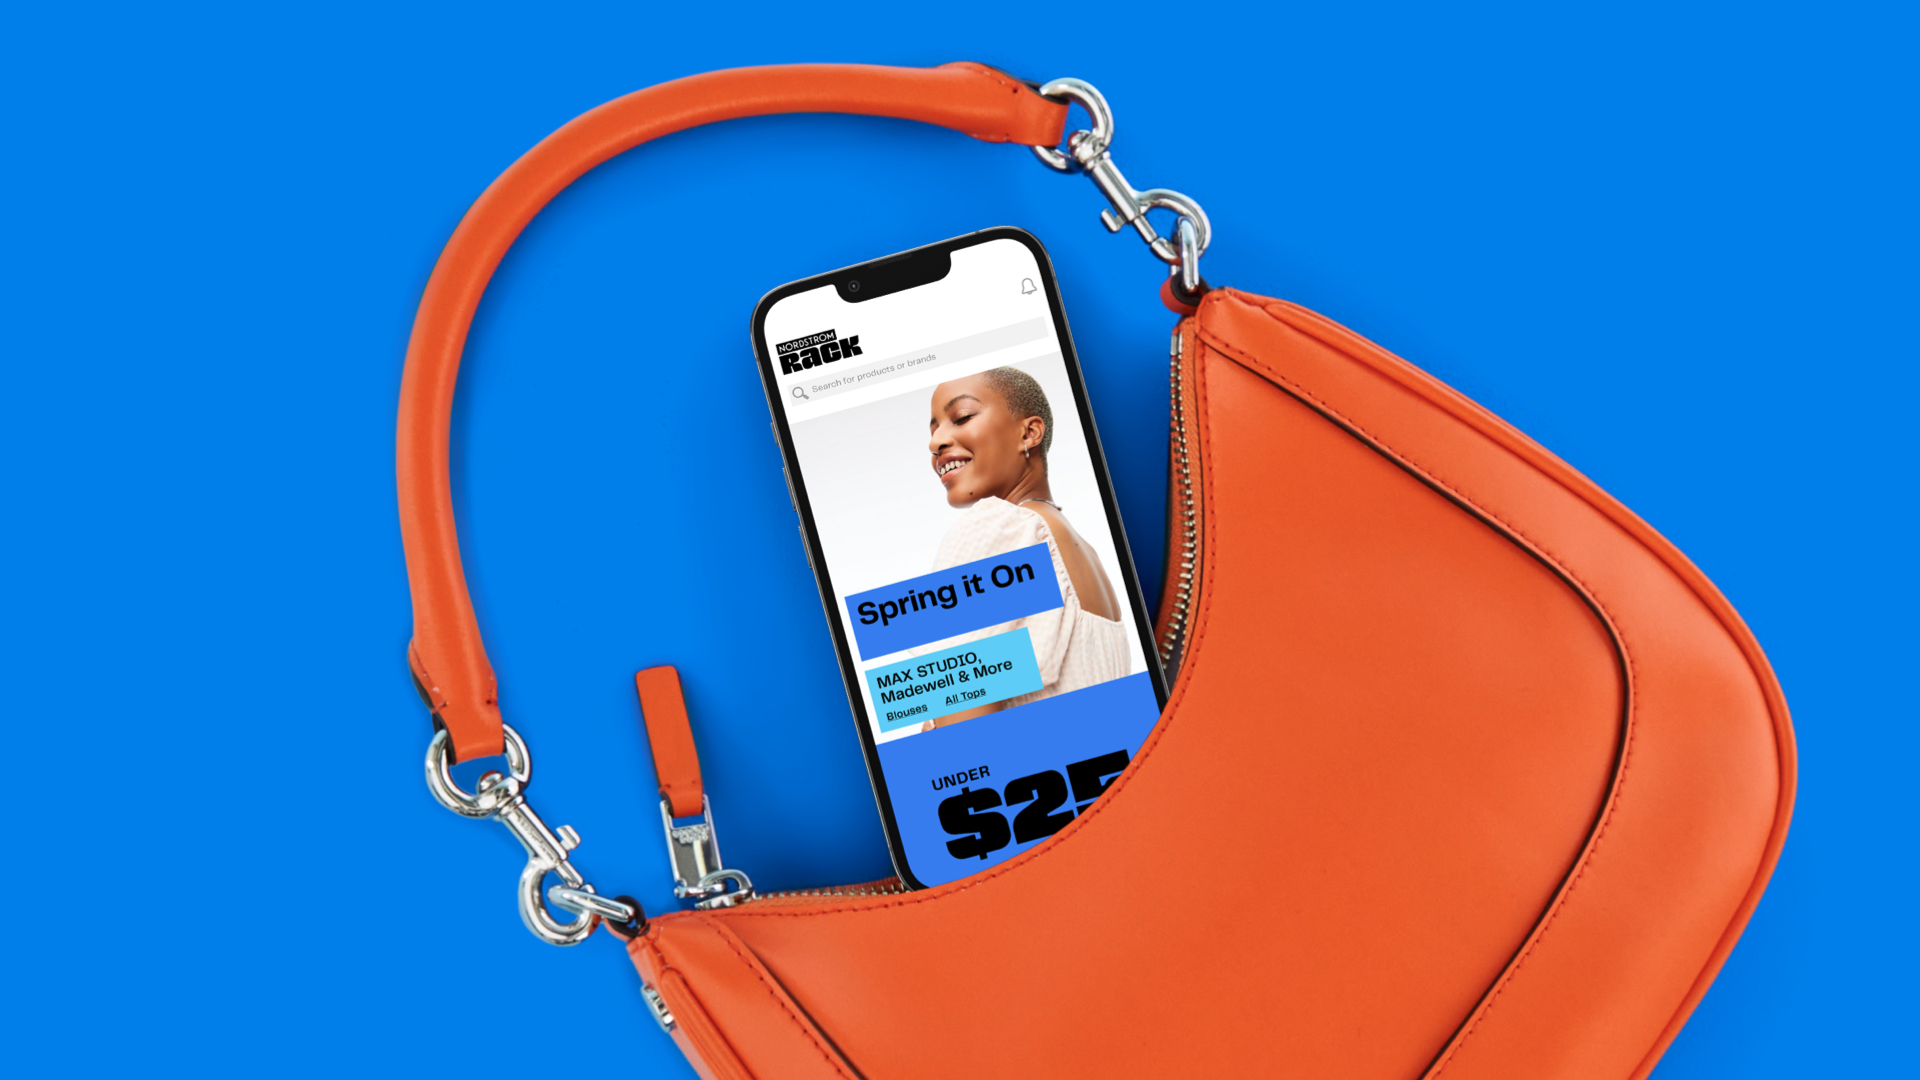 Nordstrom Rack mobile website viewed on a phone sticking out of an orange purse.